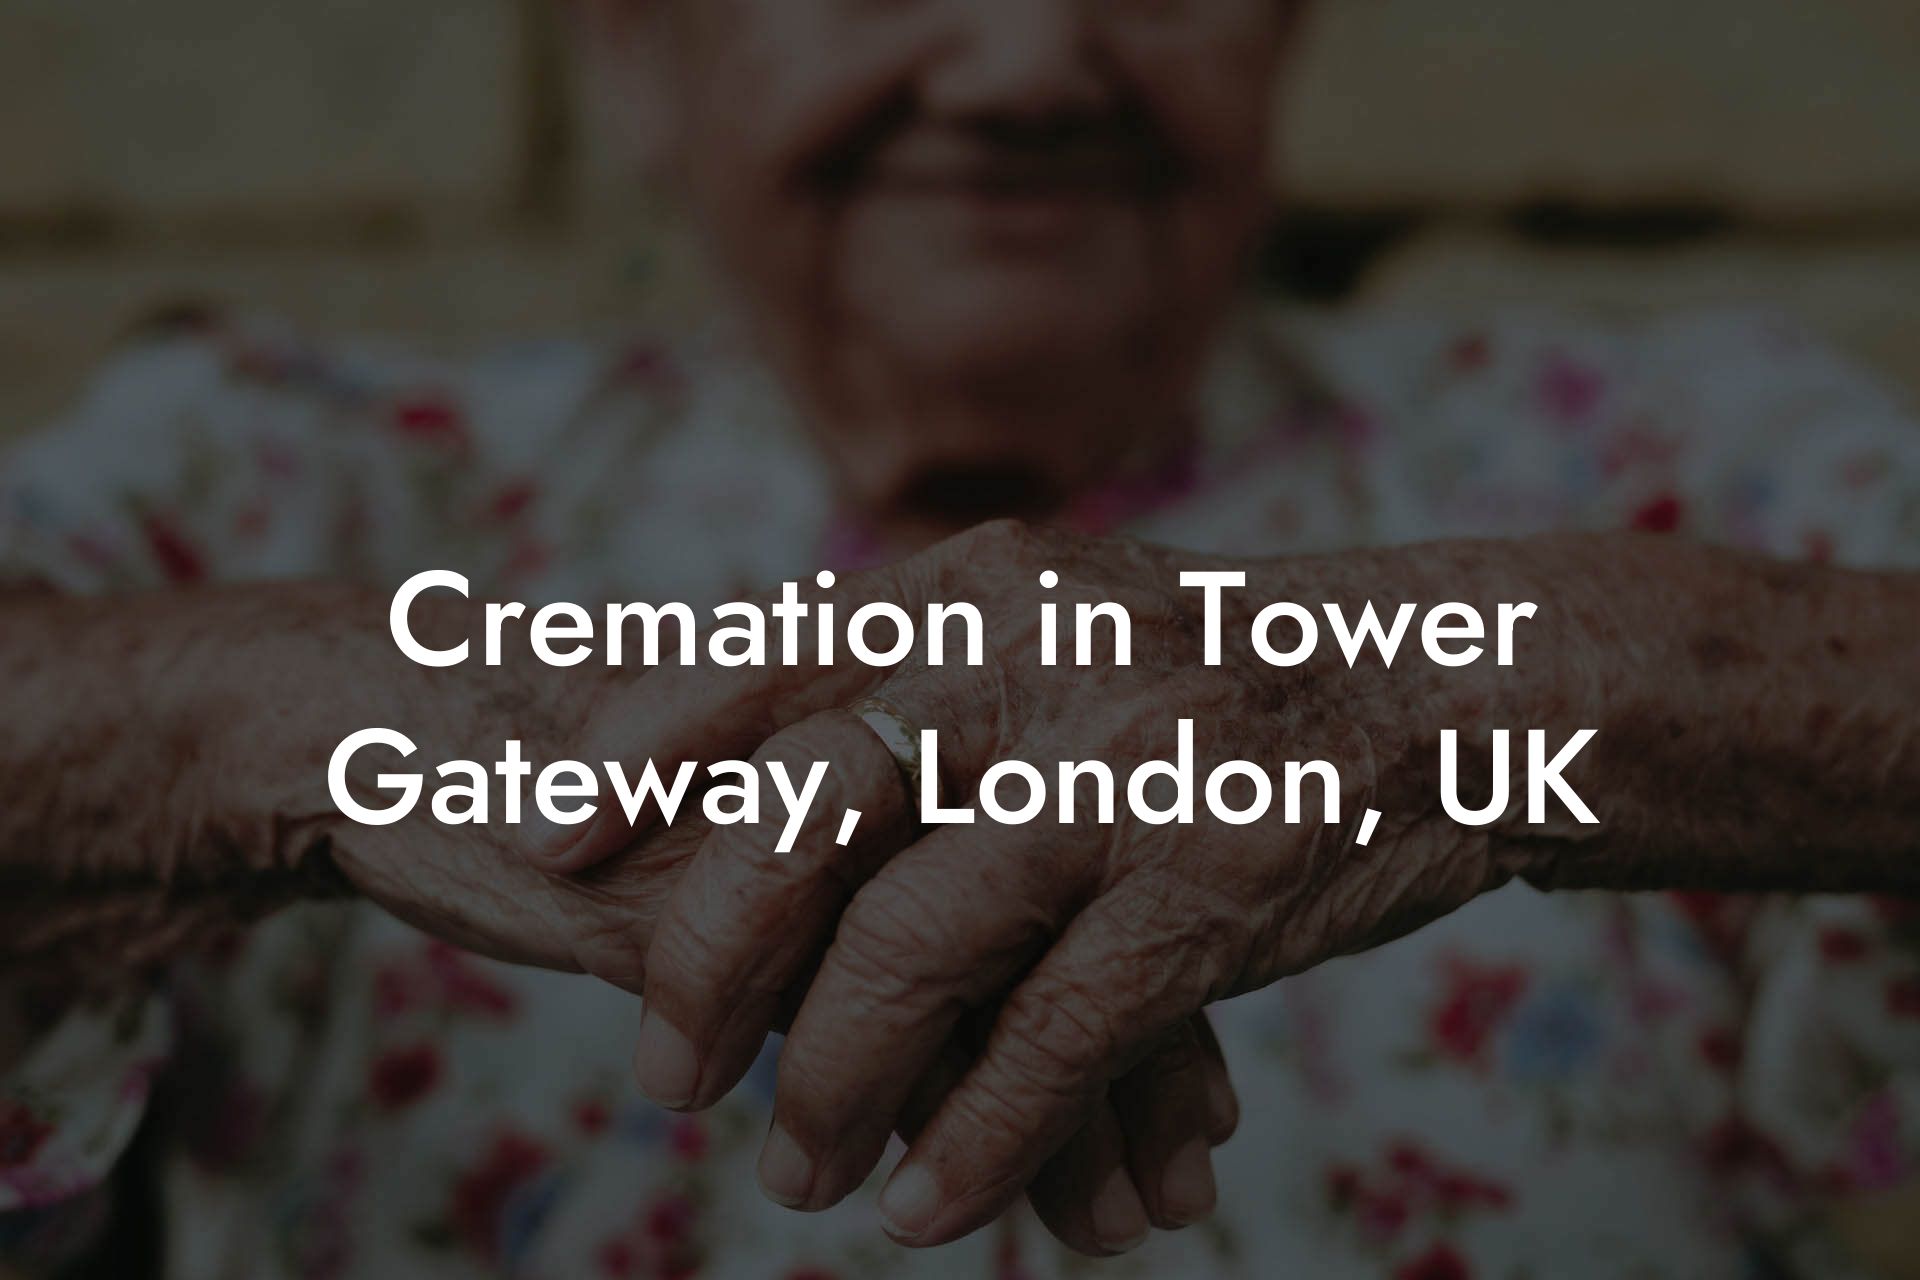 Cremation in Tower Gateway, London, UK